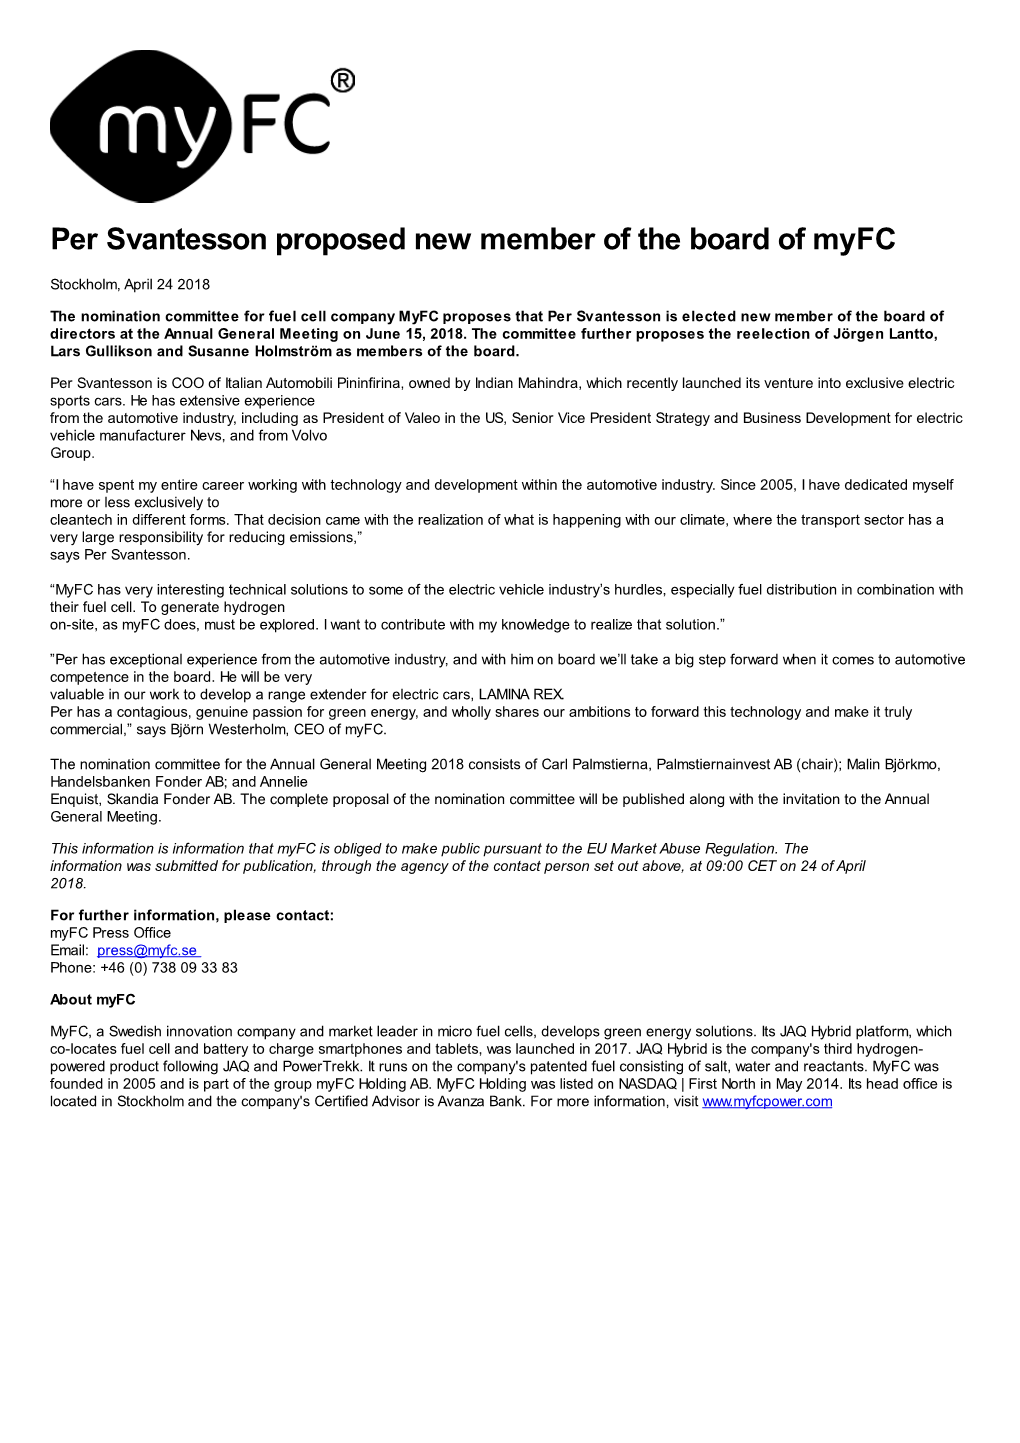 Per Svantesson Proposed New Member of the Board of Myfc